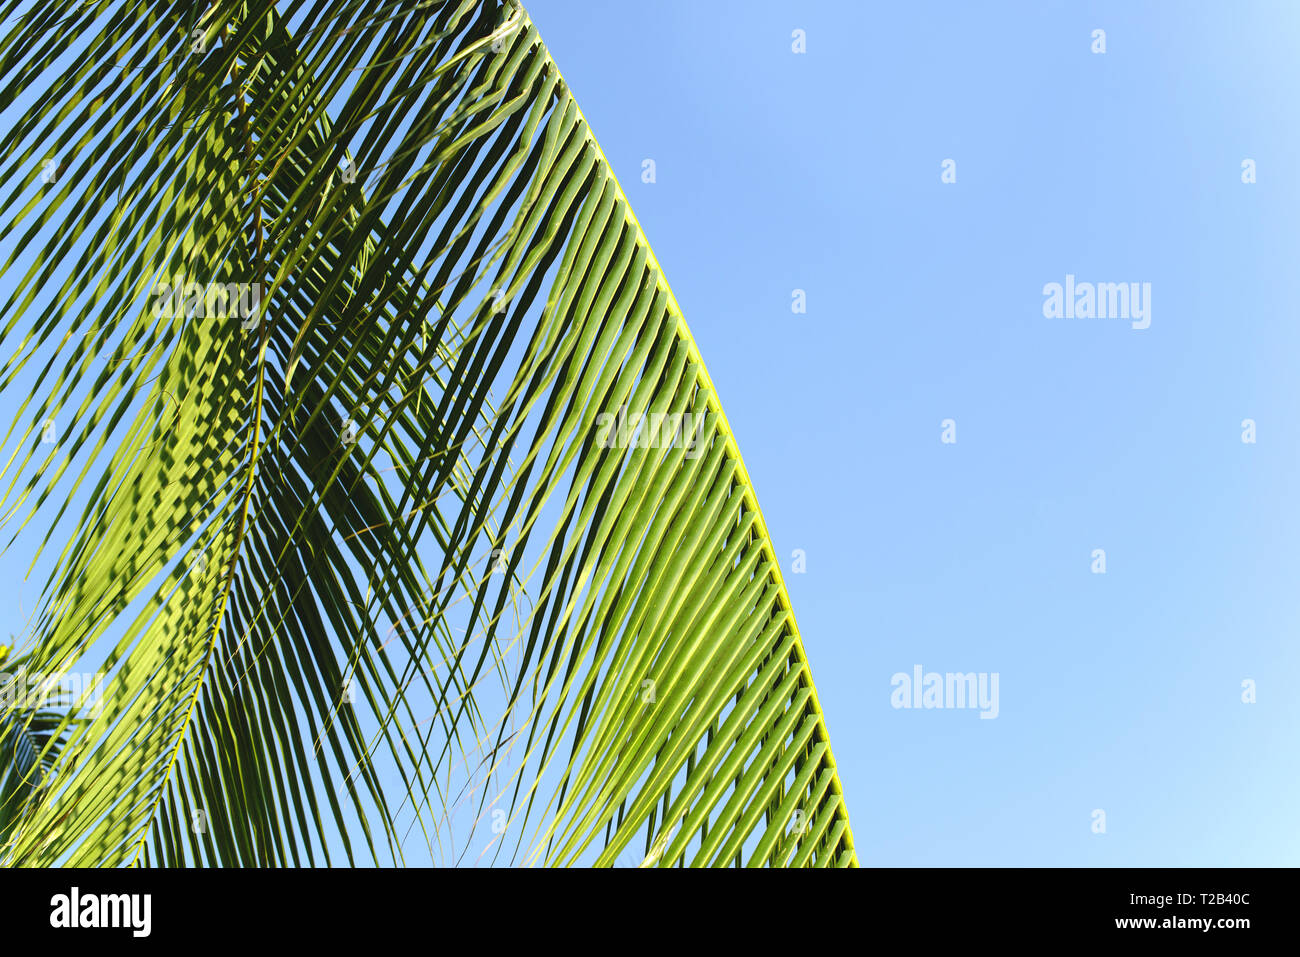 Coconut palm tree leaves with blue sky, tropical palms at sunny summer day. Free copy space. Stock Photo